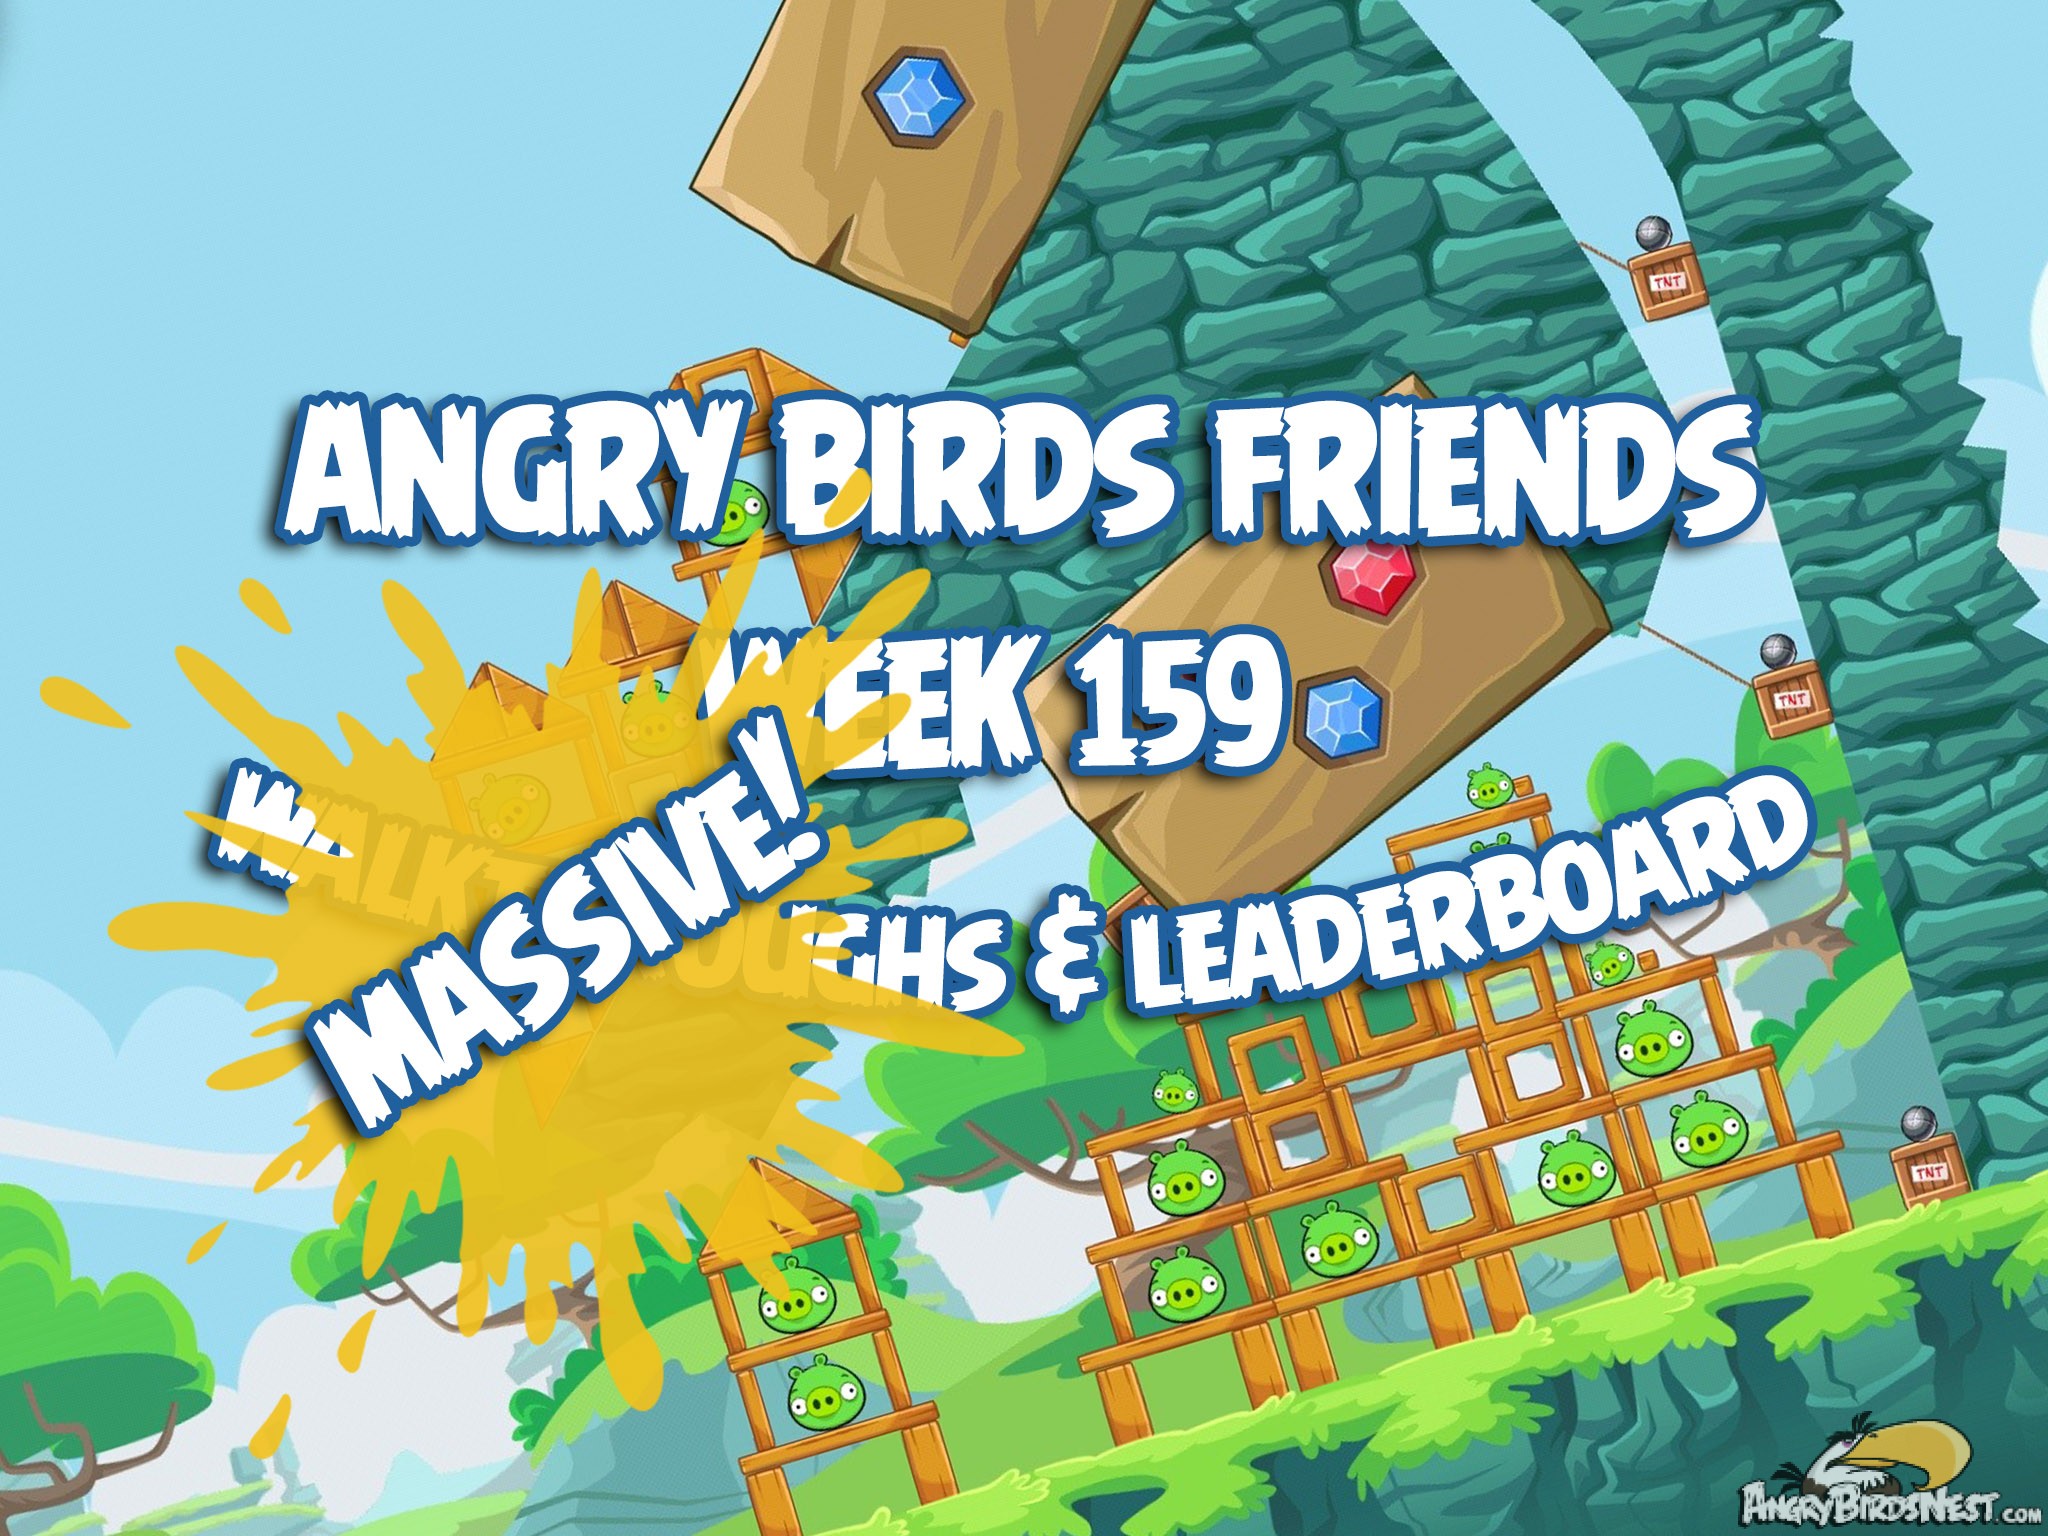 Angry Birds Friends Massive Tournament Feature Image 2015